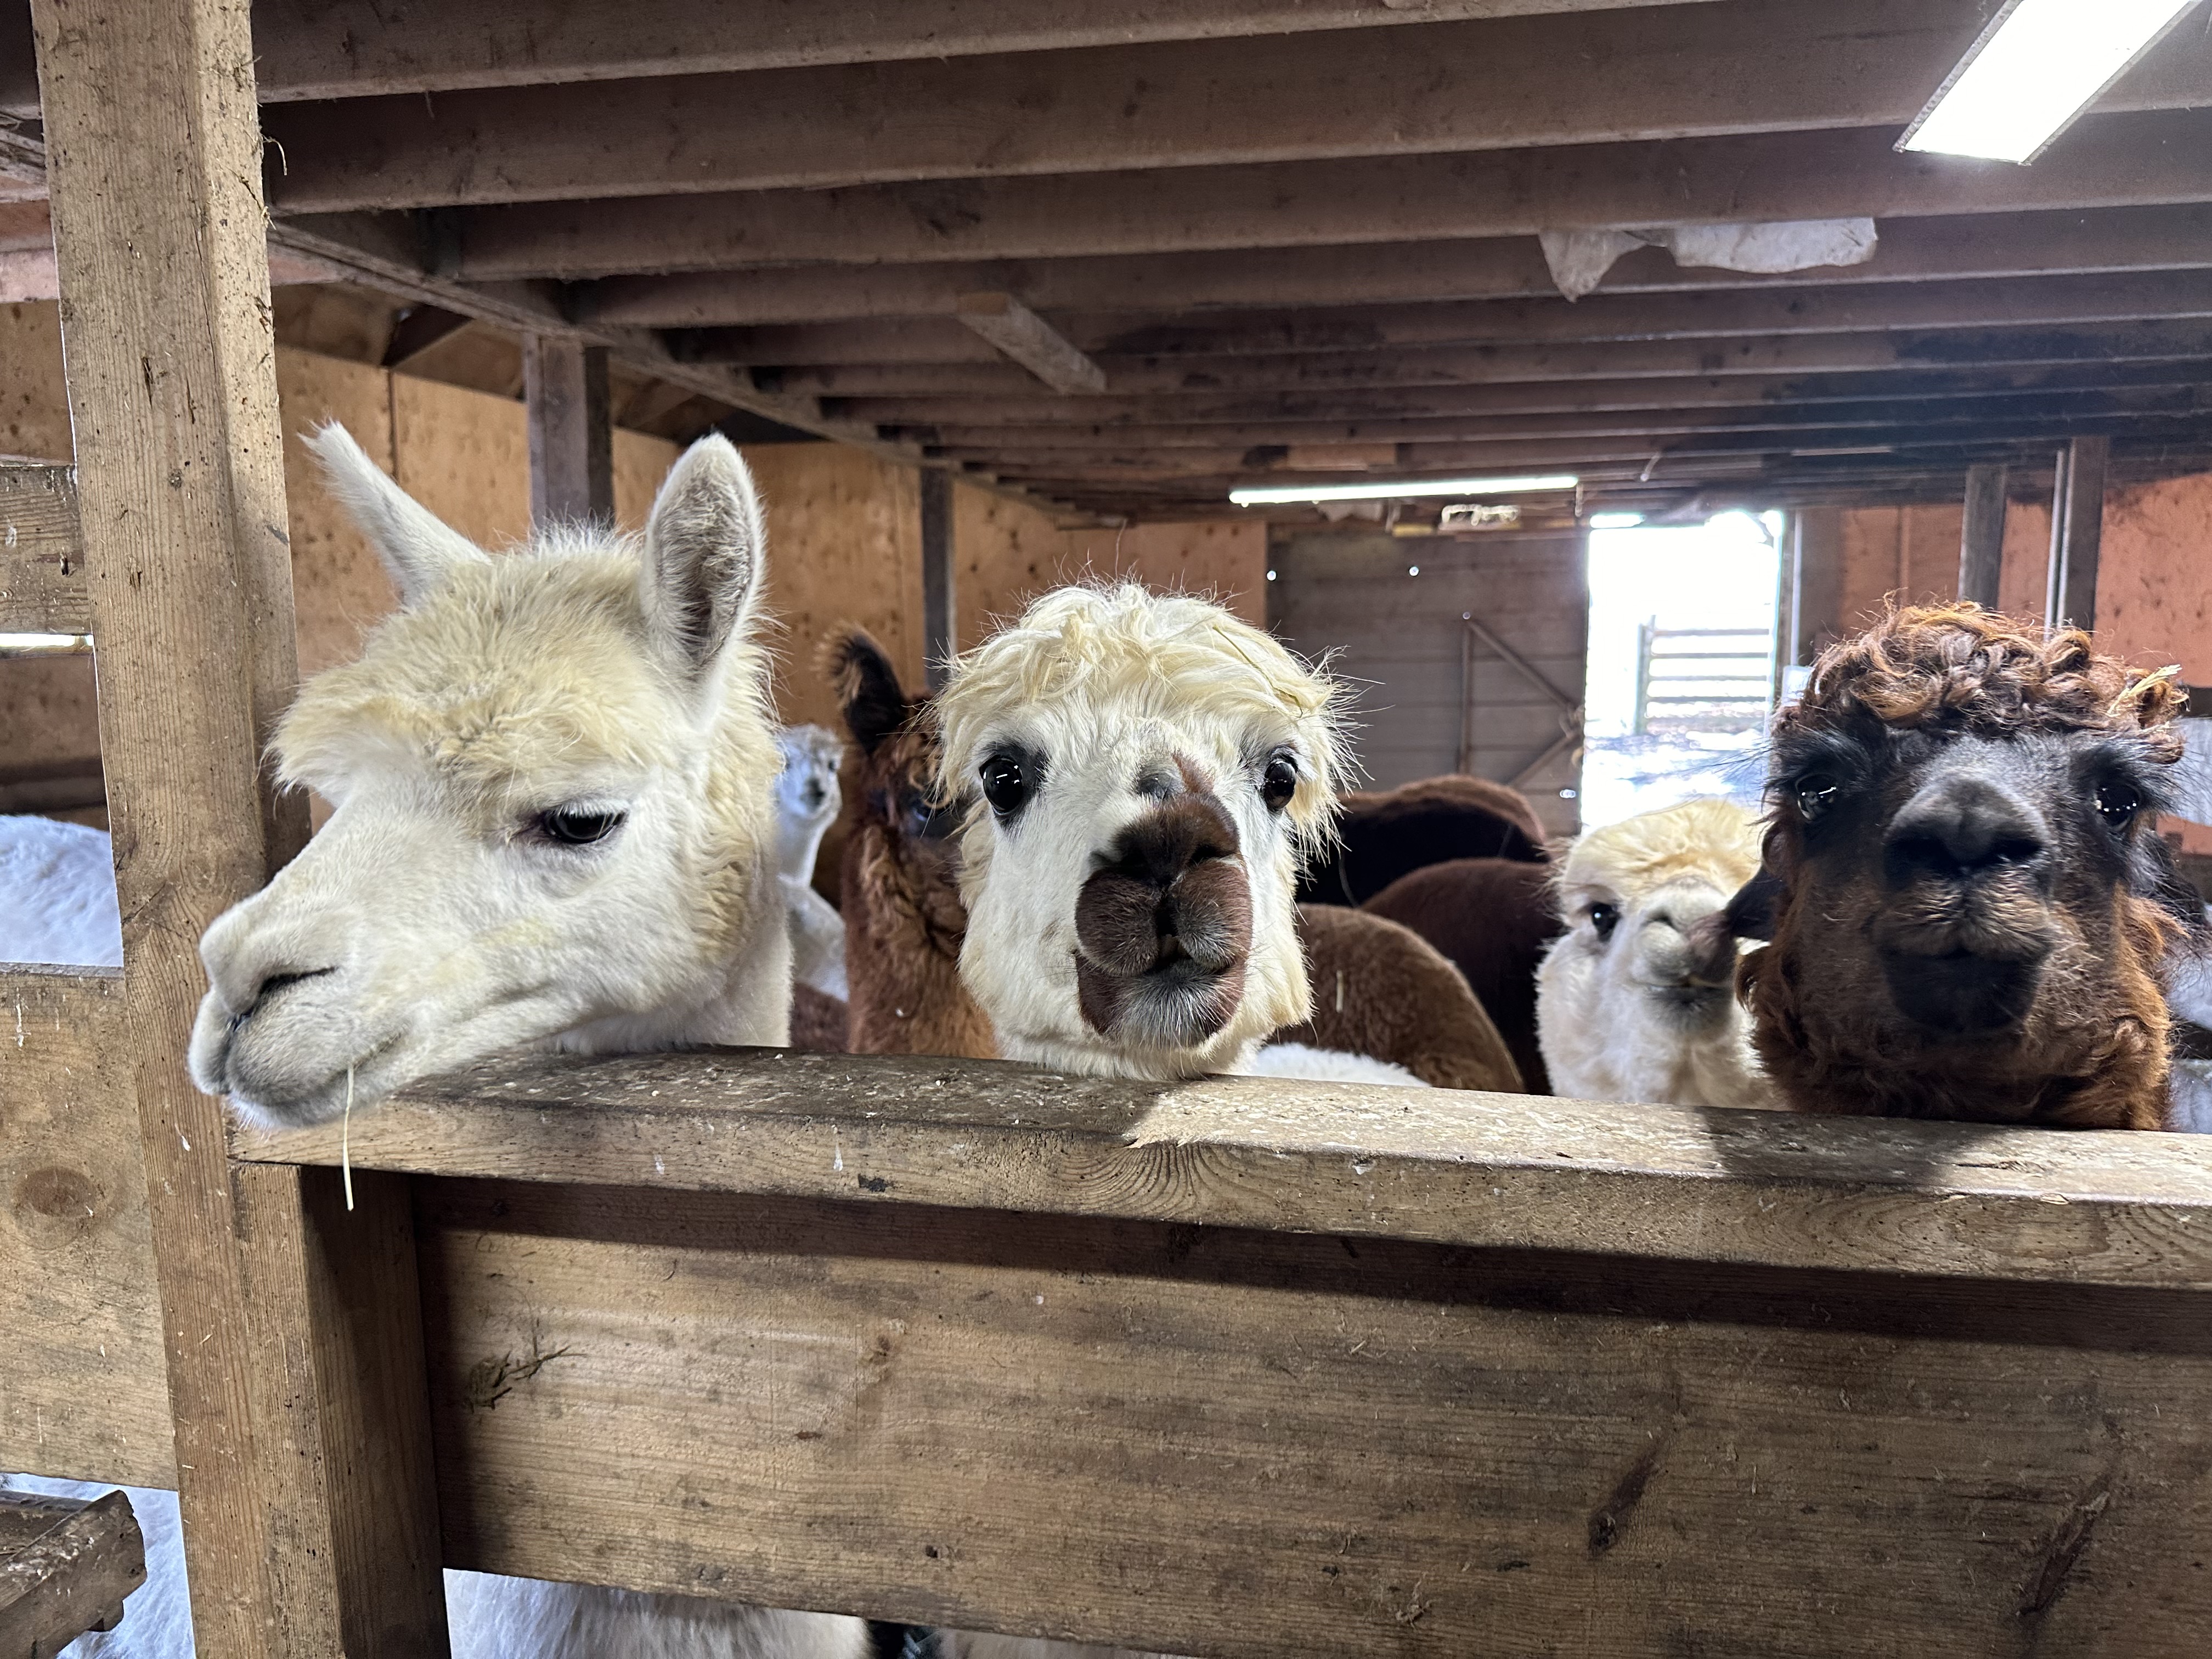 Brown alpaca in barn looking to the side of the camera